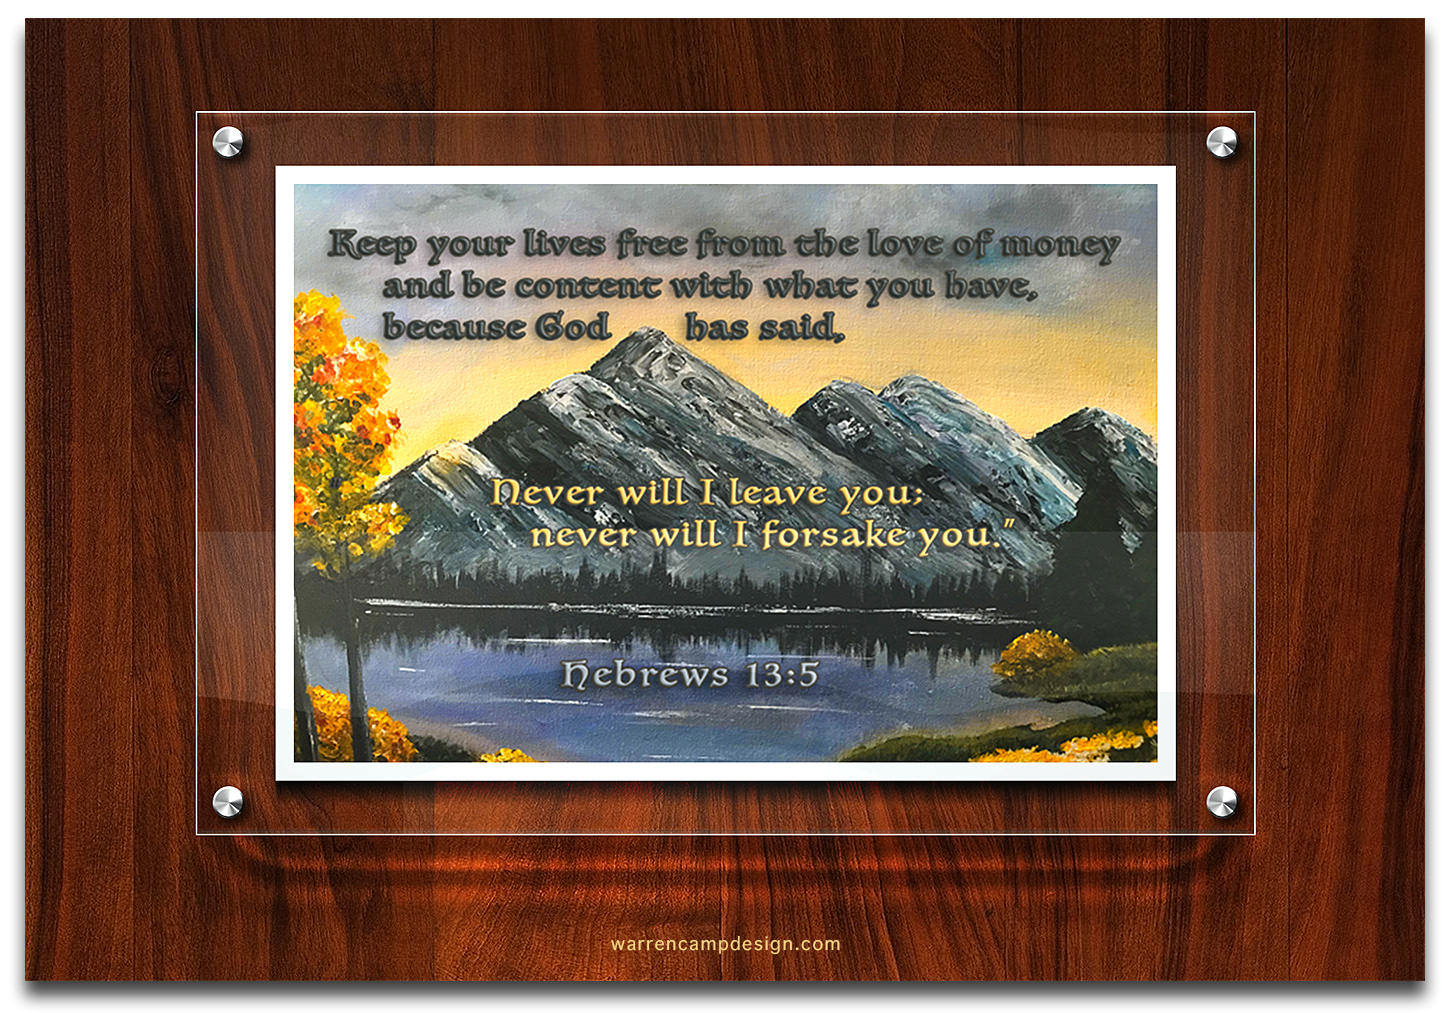 Scripture picture of Hebrews 13:5, emphasizing that God will not leave us nor forsake us